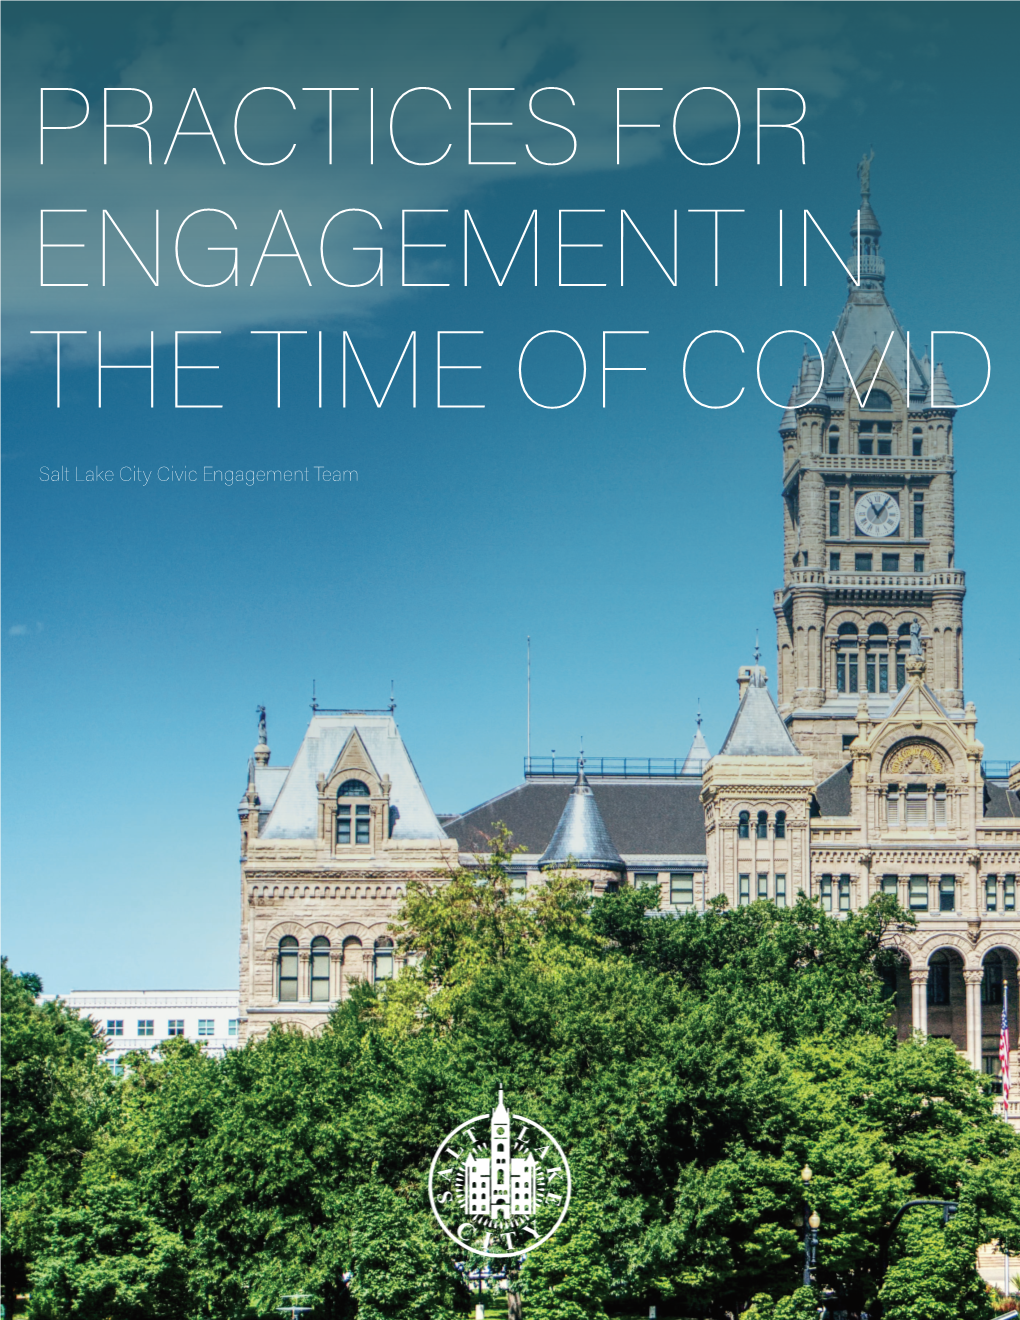 Best Practices for Engagement in the Time of COVID-19